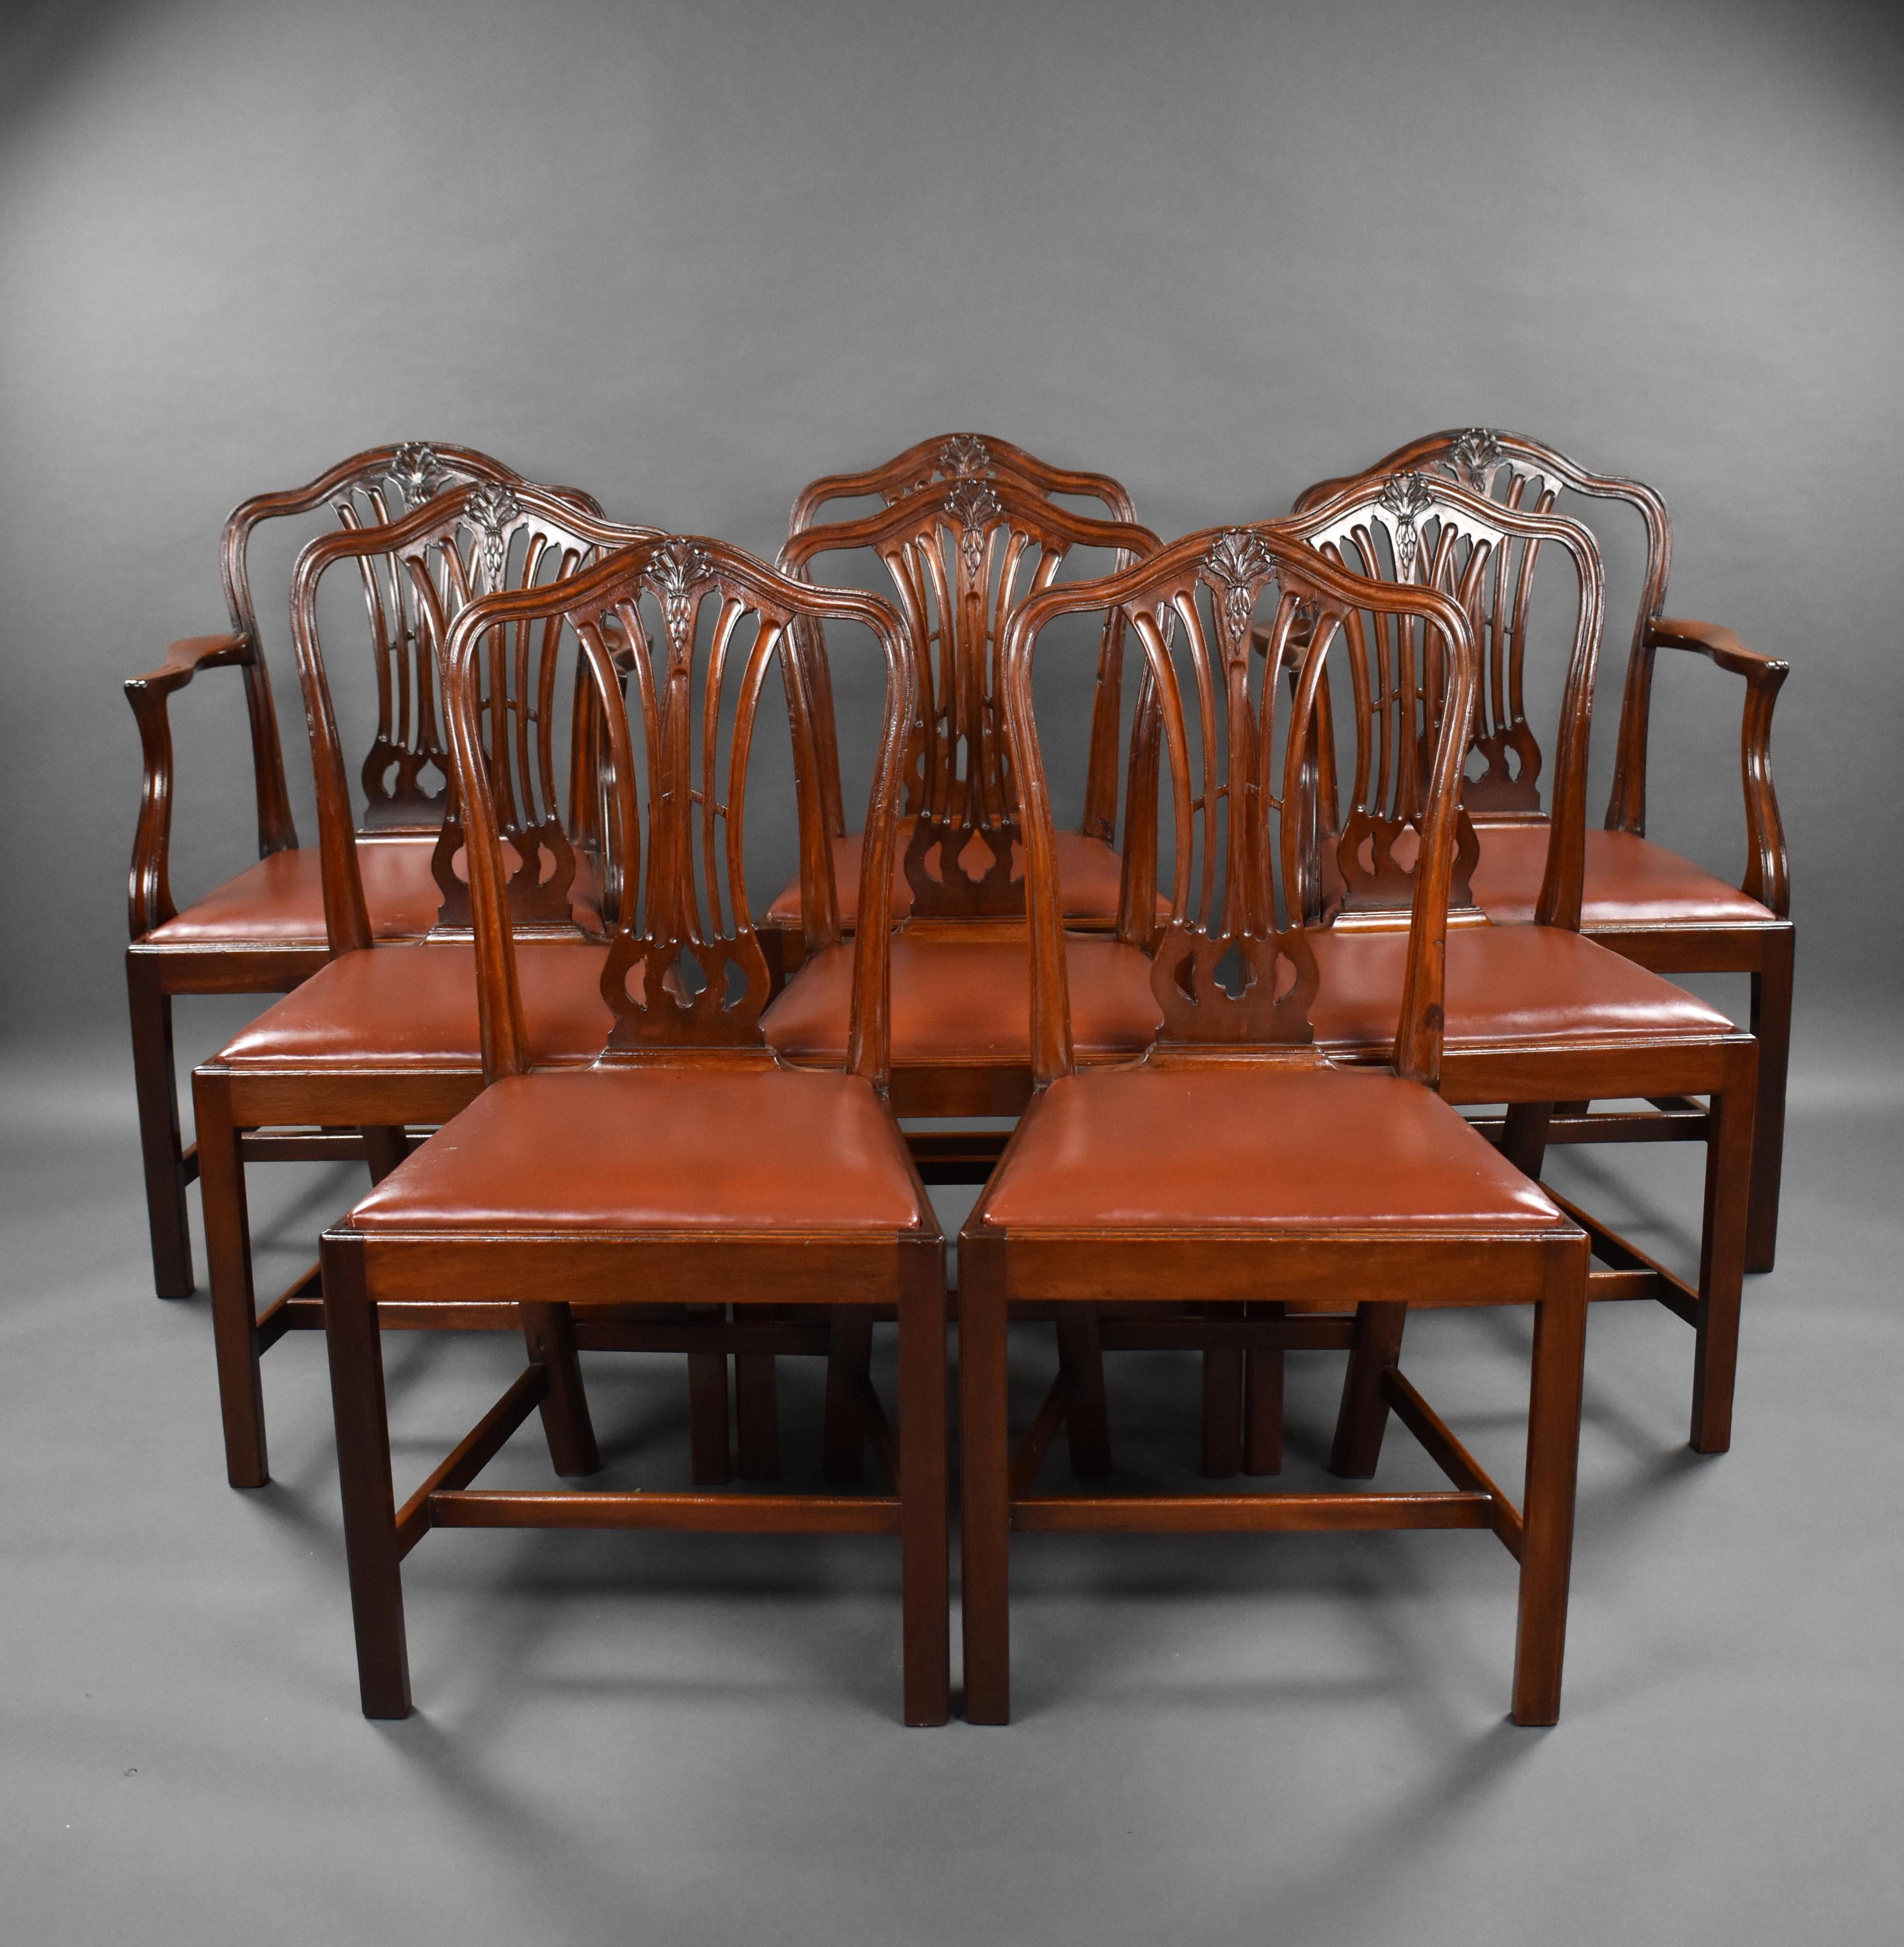 A good quality set of 8 George III mahogany dining chairs, remaining in good condition having been fully restored.

Measures: Single chairs = Width: 51cm depth: 51cm height: 92cm
Carver chairs = Width: 58cm depth: 55cm height: 92cm.